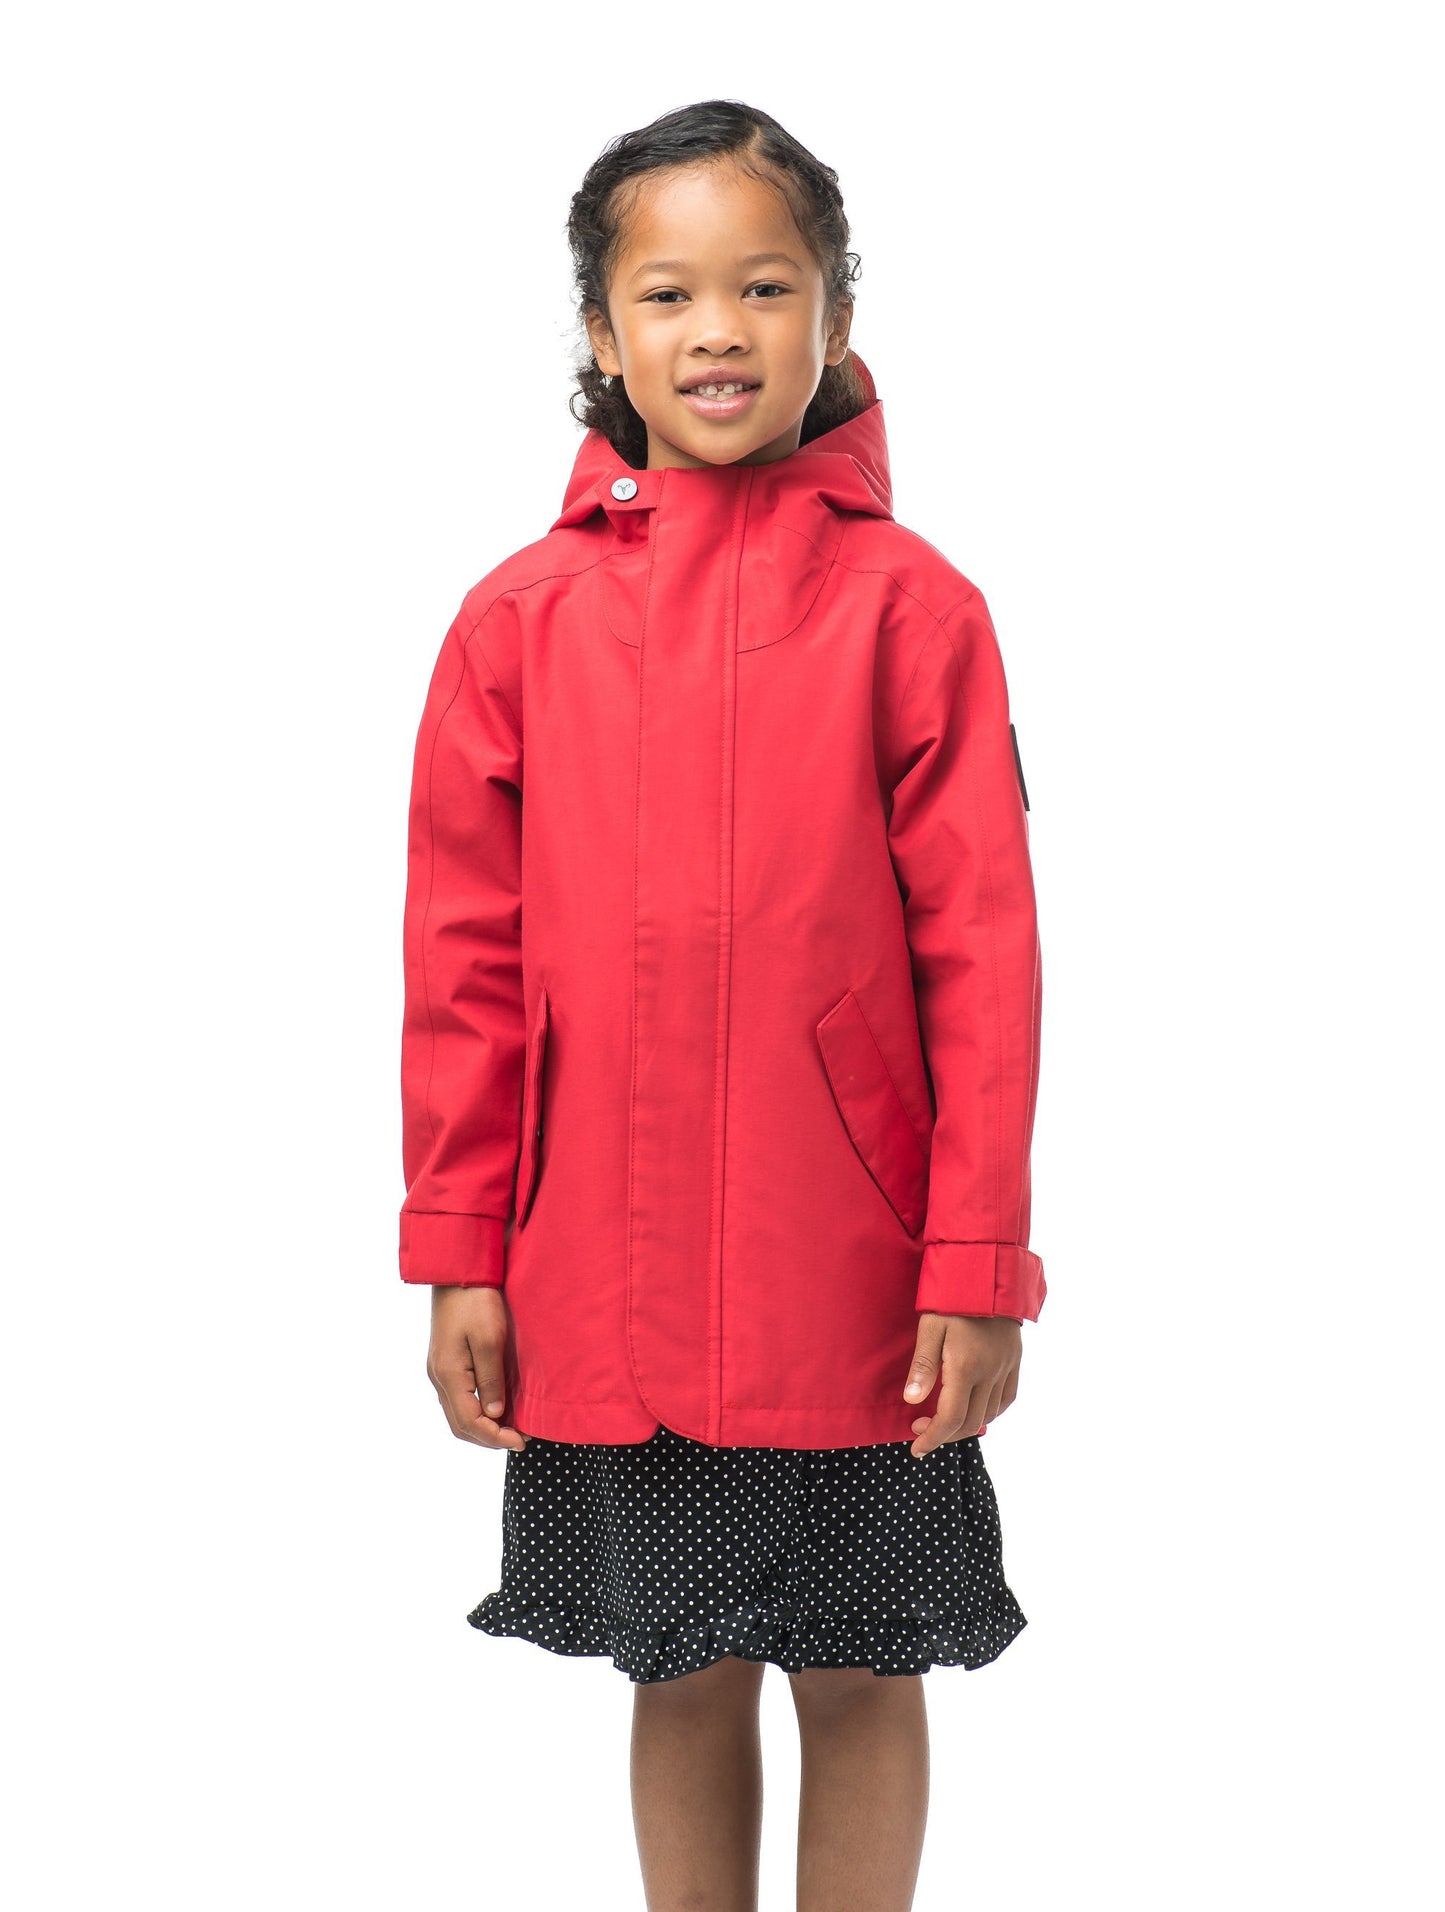 Kids' hip length raincoat with hood in Red